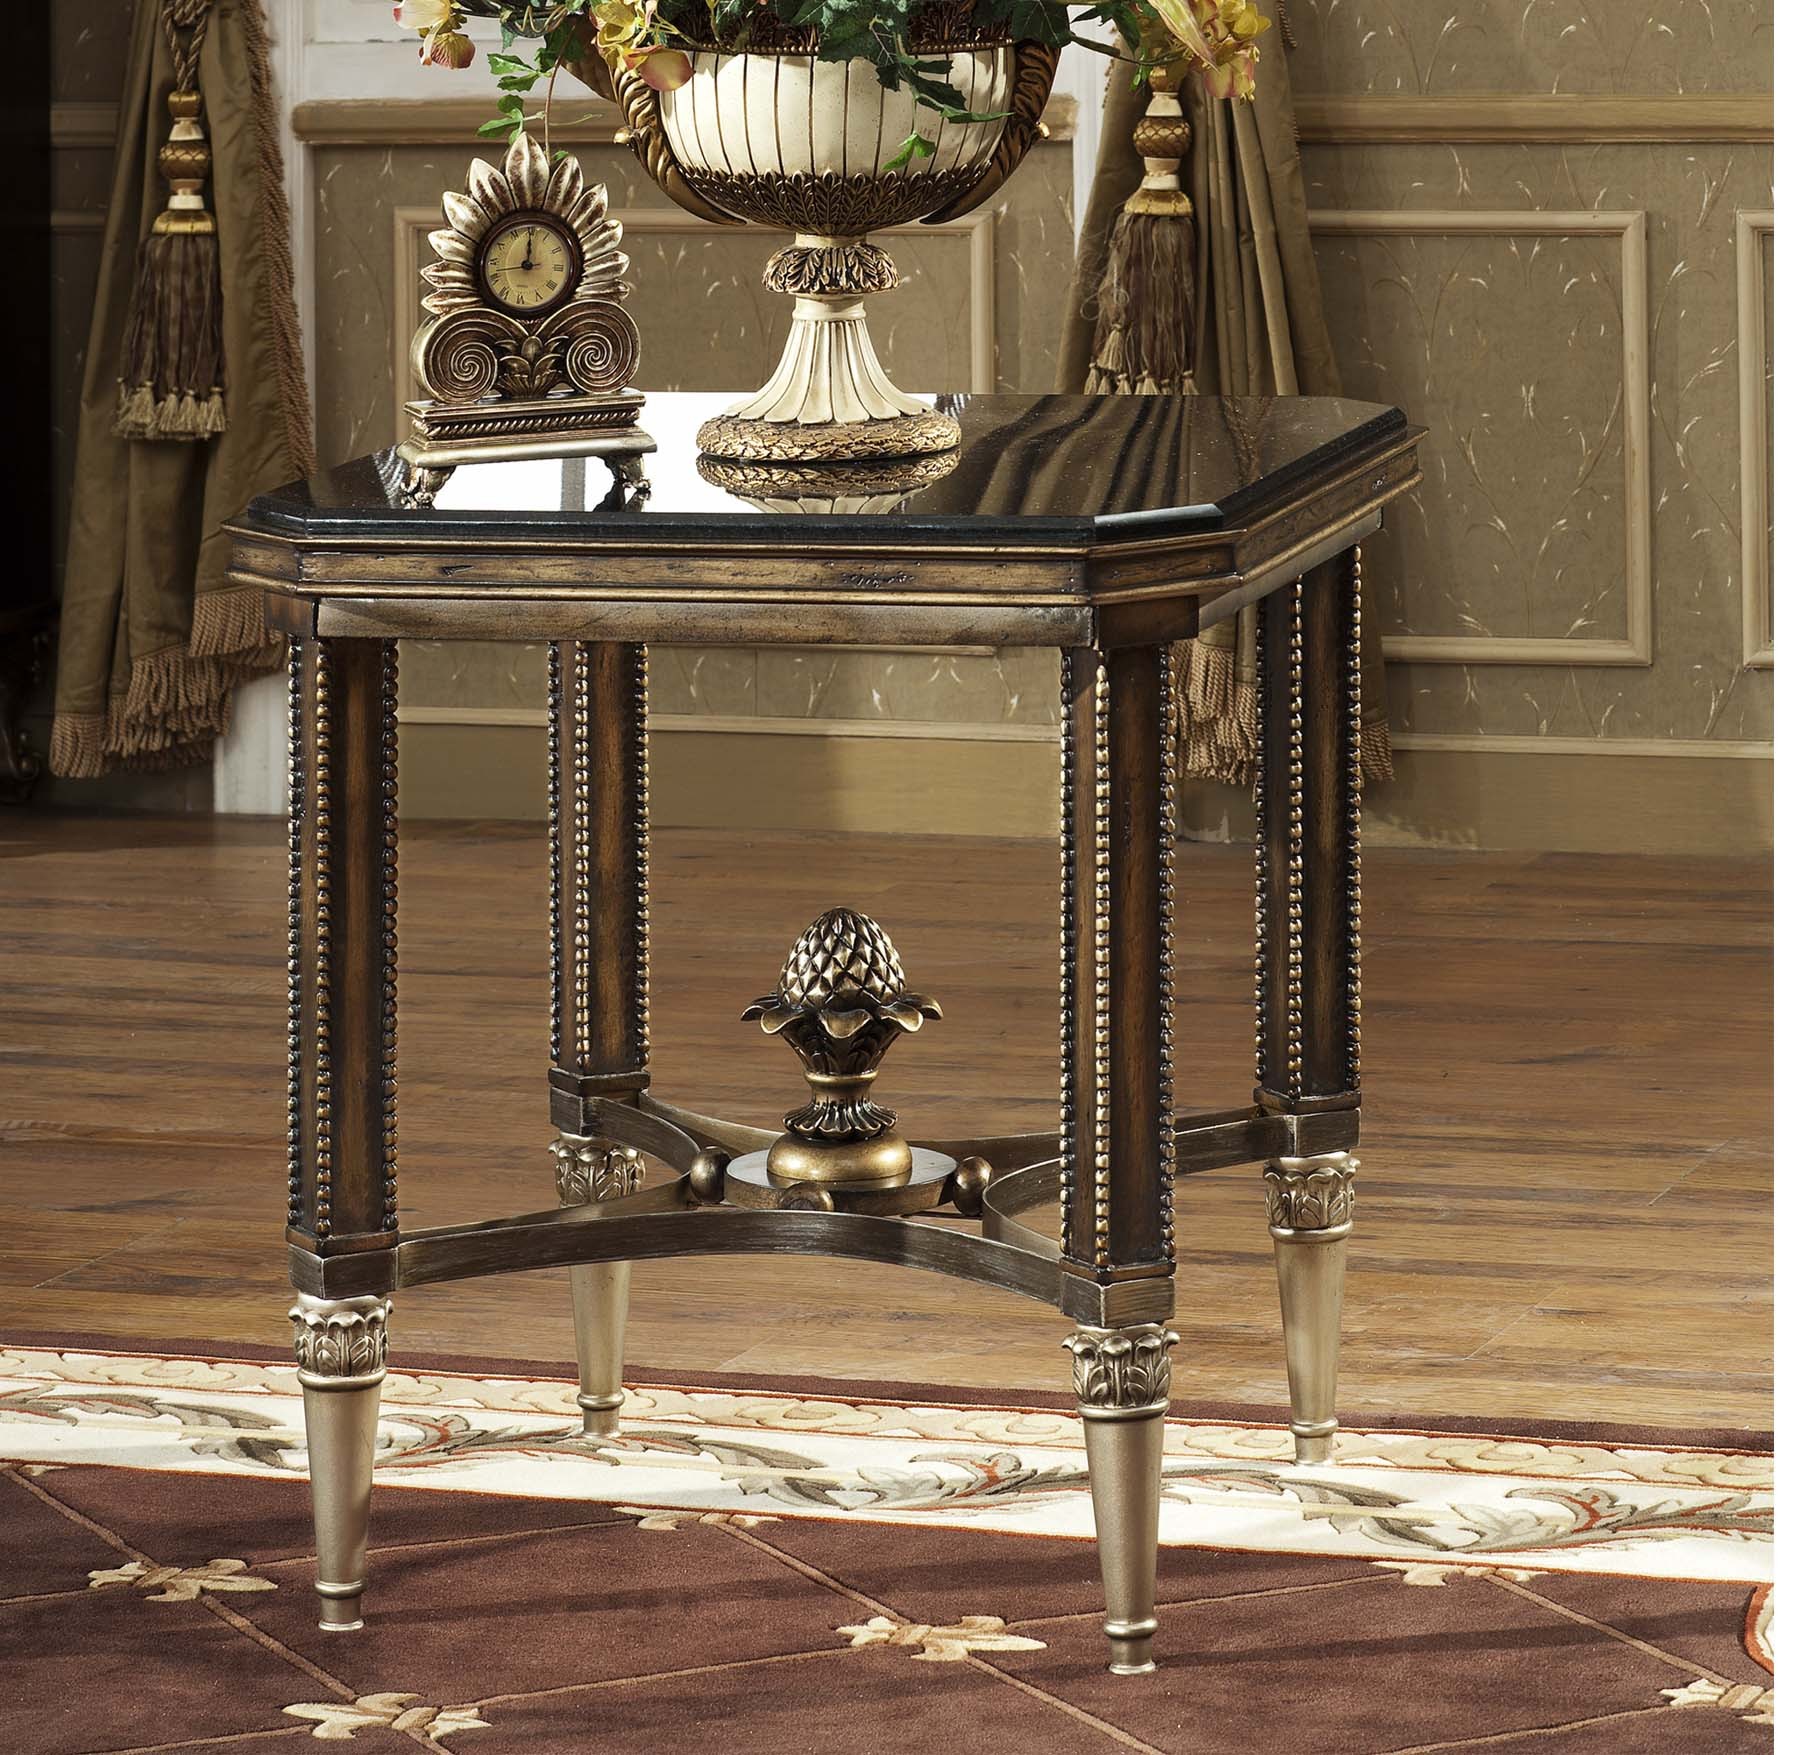 Wellesley End Table shown in Parisian Bronze finish